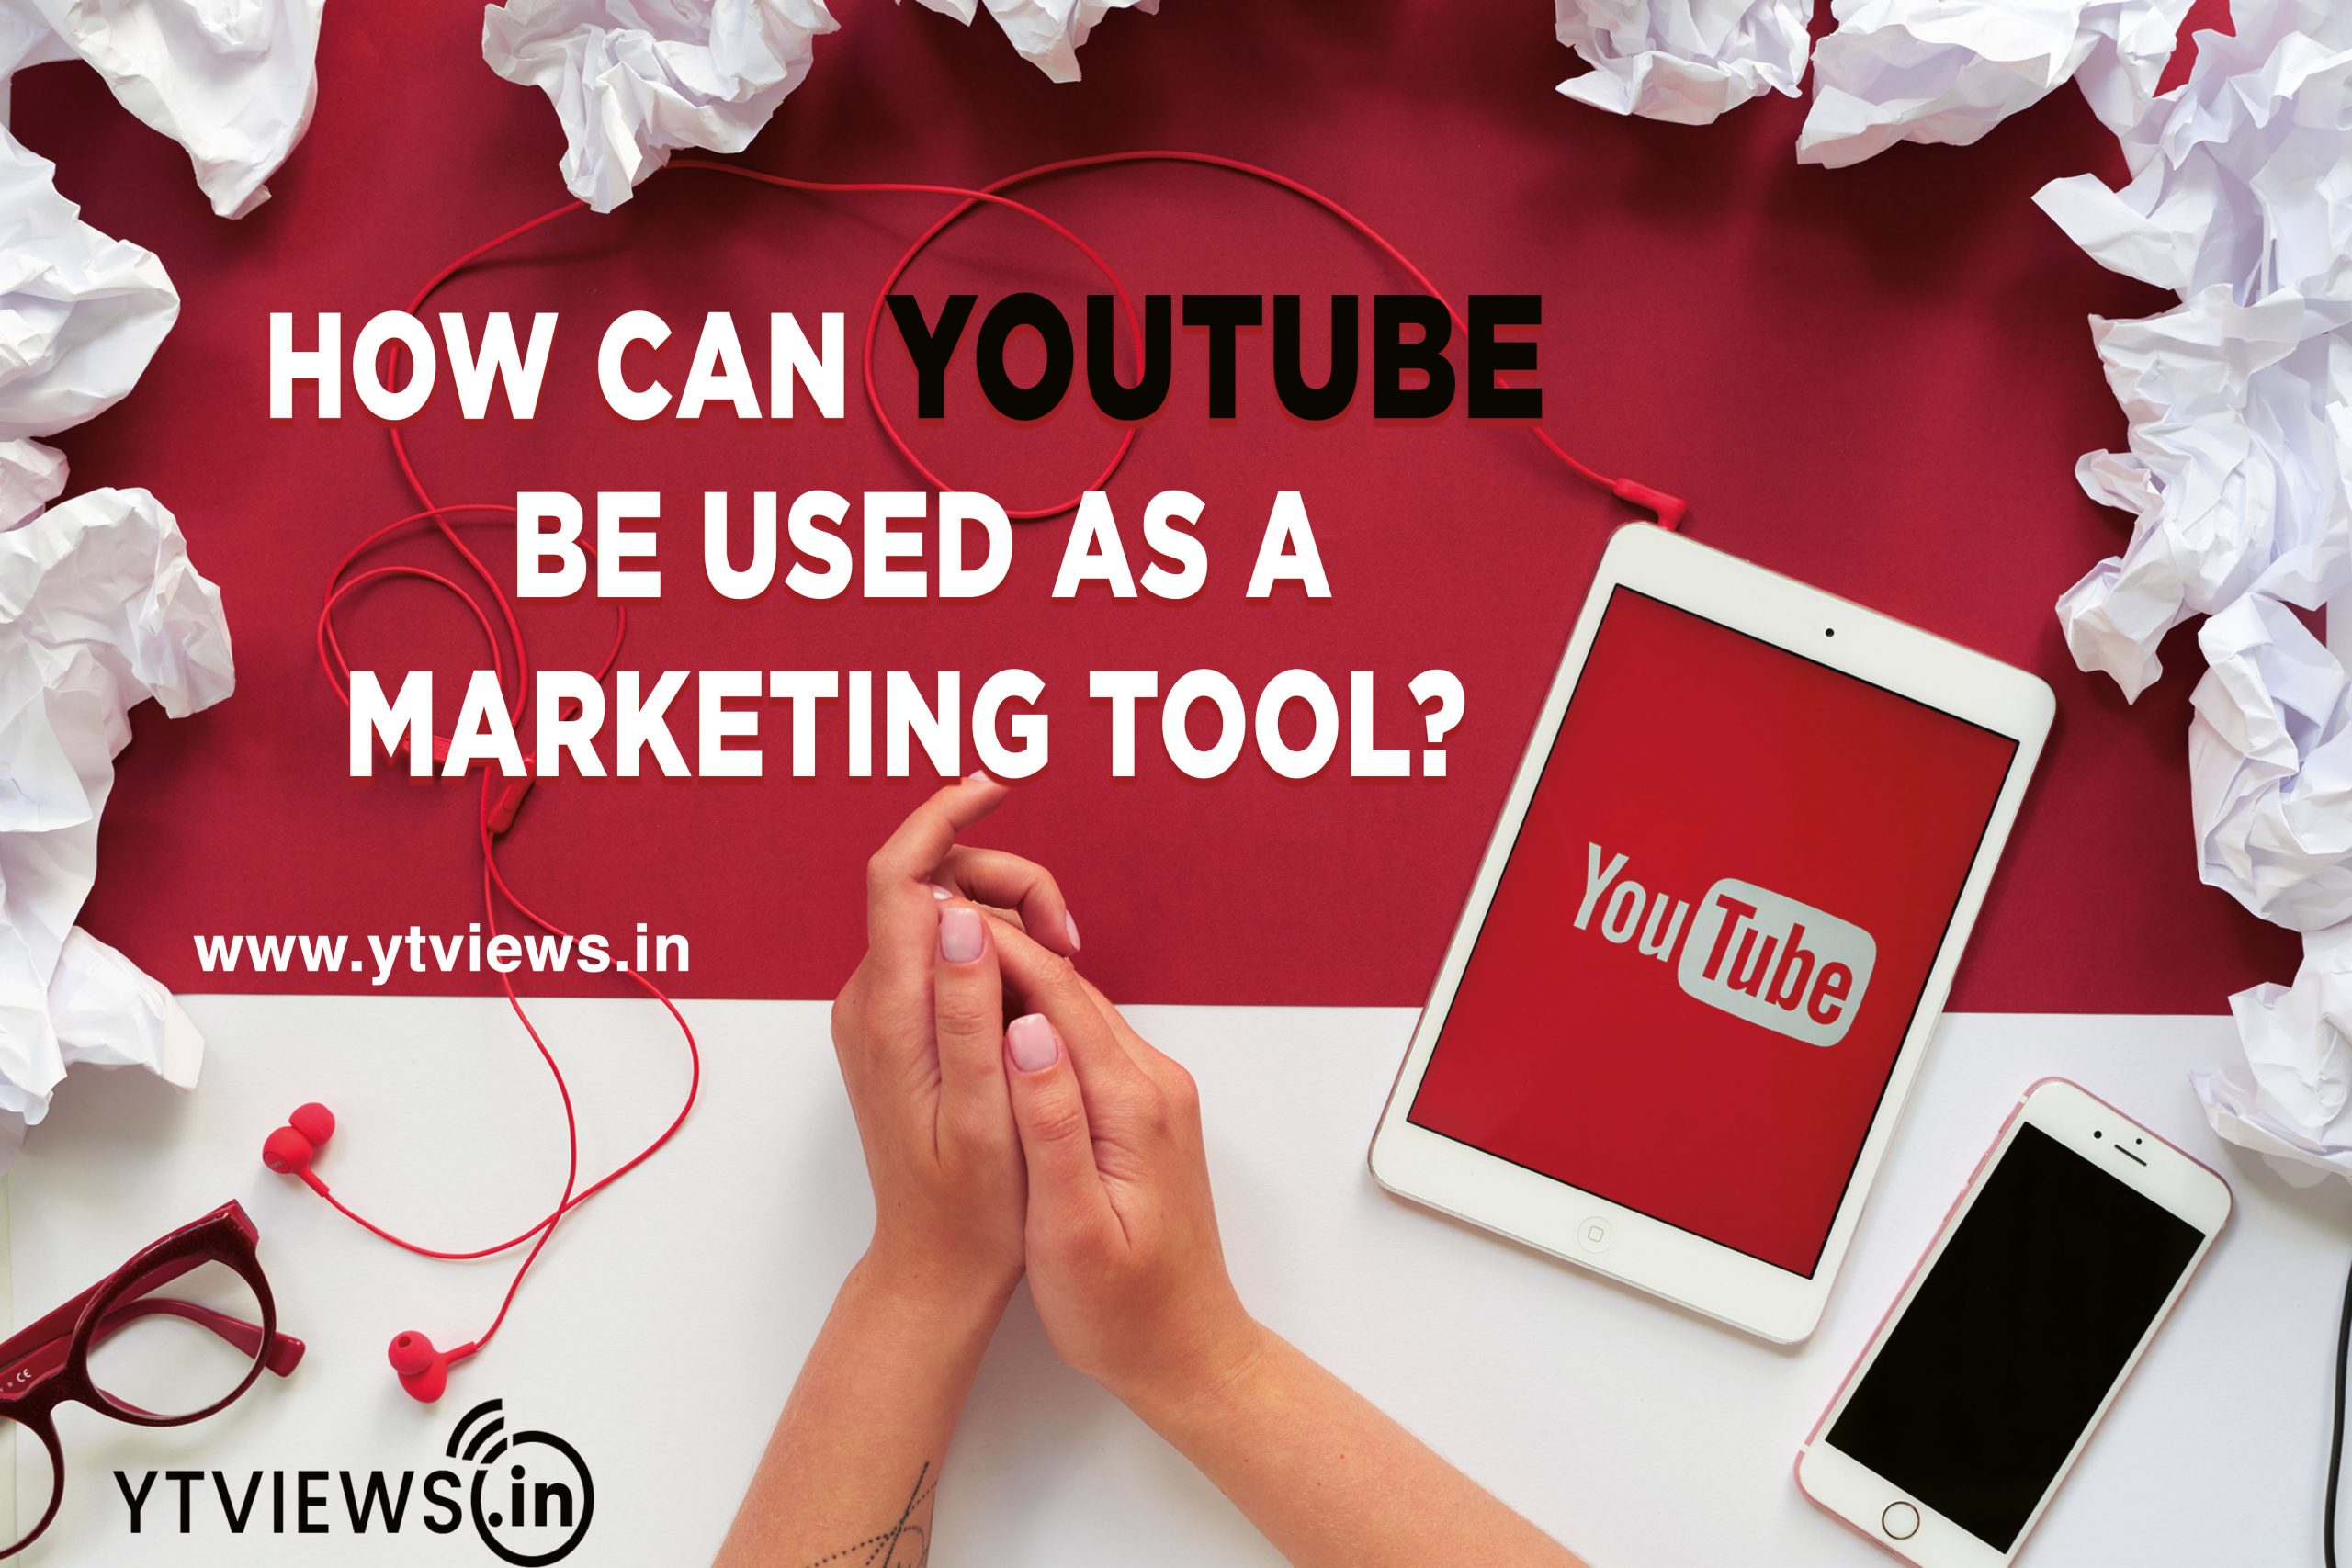 How can Youtube be used as a marketing tool?